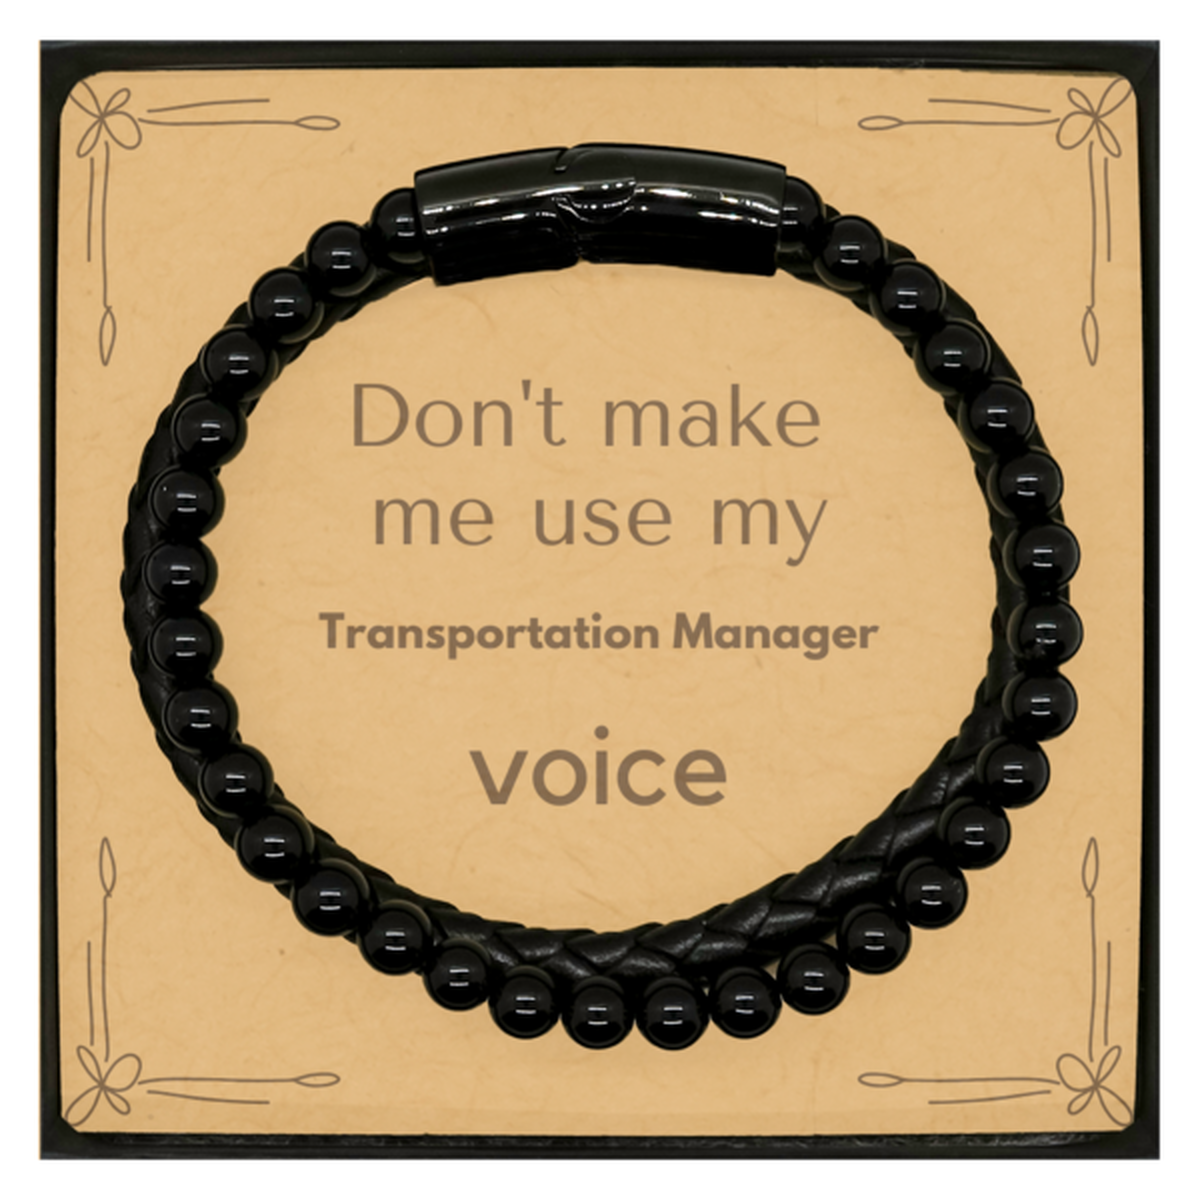 Don't make me use my Transportation Manager voice, Sarcasm Transportation Manager Card Gifts, Christmas Transportation Manager Stone Leather Bracelets Birthday Unique Gifts For Transportation Manager Coworkers, Men, Women, Colleague, Friends